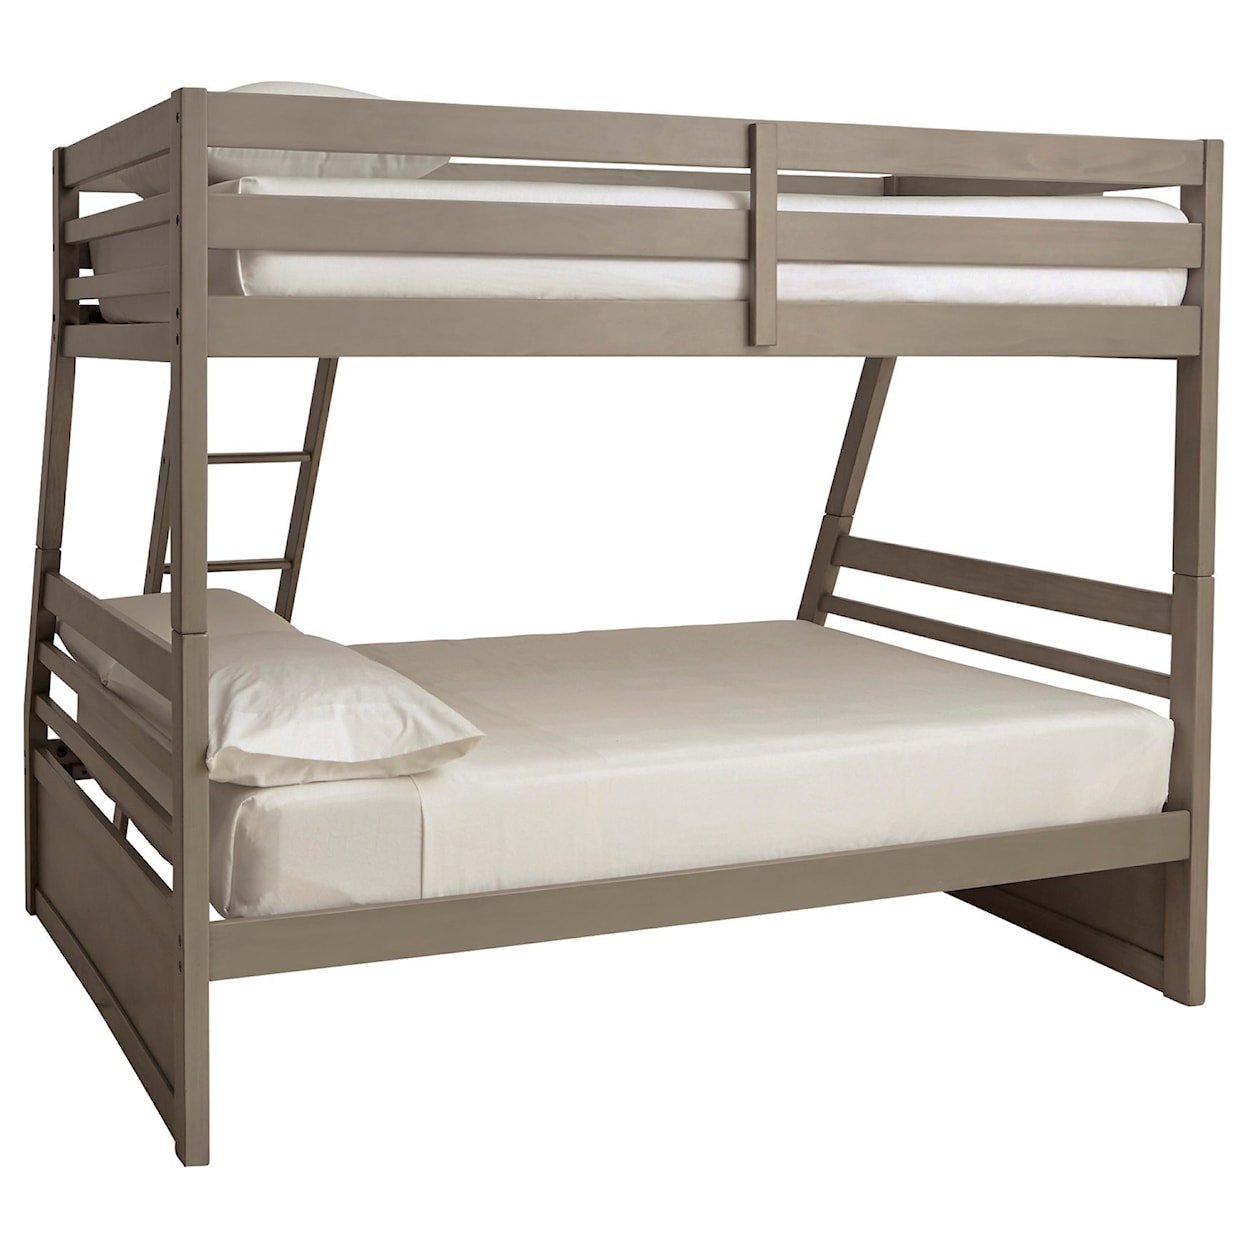 Signature Design By Ashley Lettner B733b38 Twin Full Bunk Bed Value City Furniture Bed